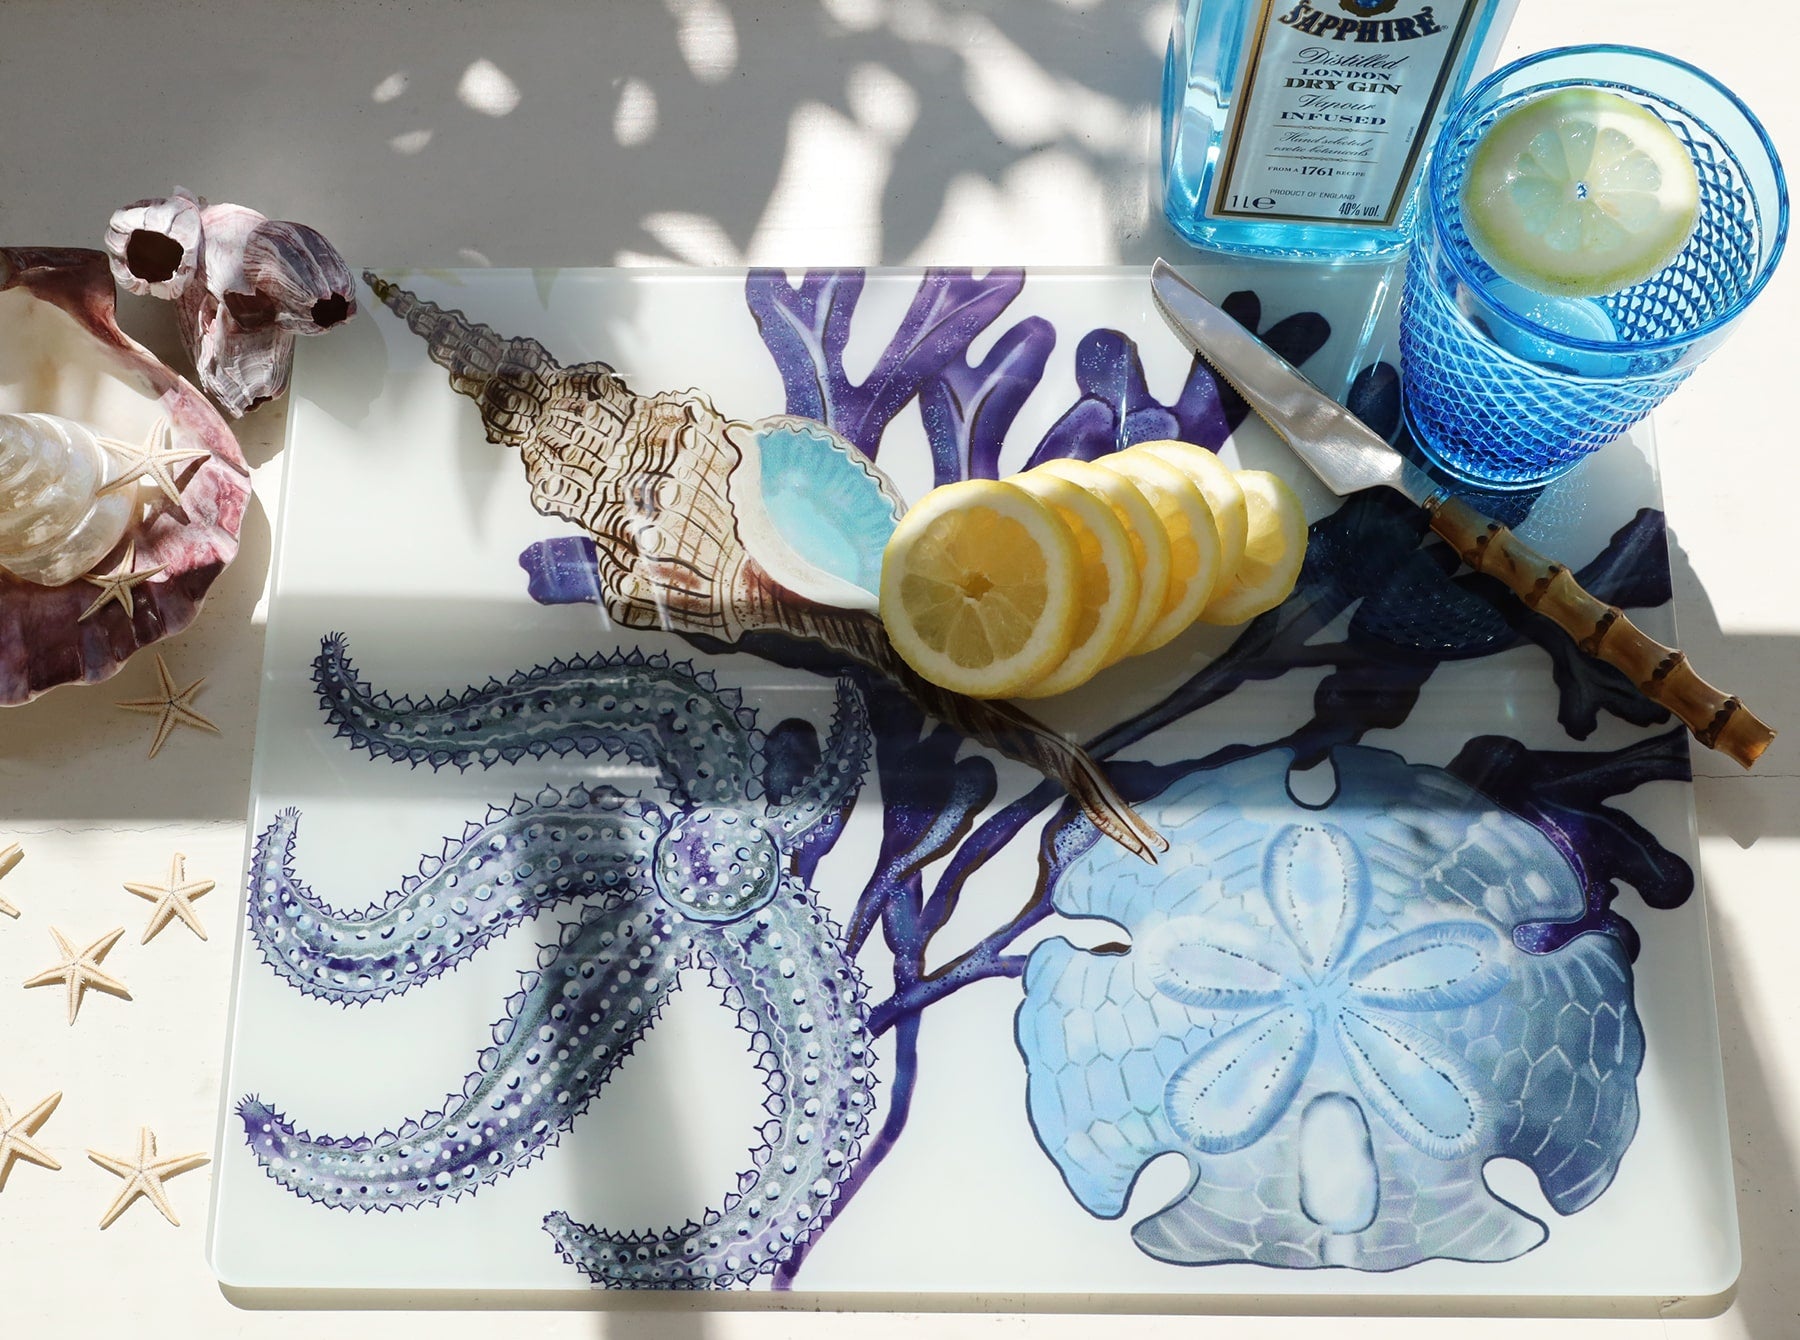 Glass worktop saver in our Beachcomber design with Starfish,a whelk,seaweed and a sand dollar design,placed on a table.On the worktop saver are sliced lemons,a knife and a glass of gin with the bottle behind it.